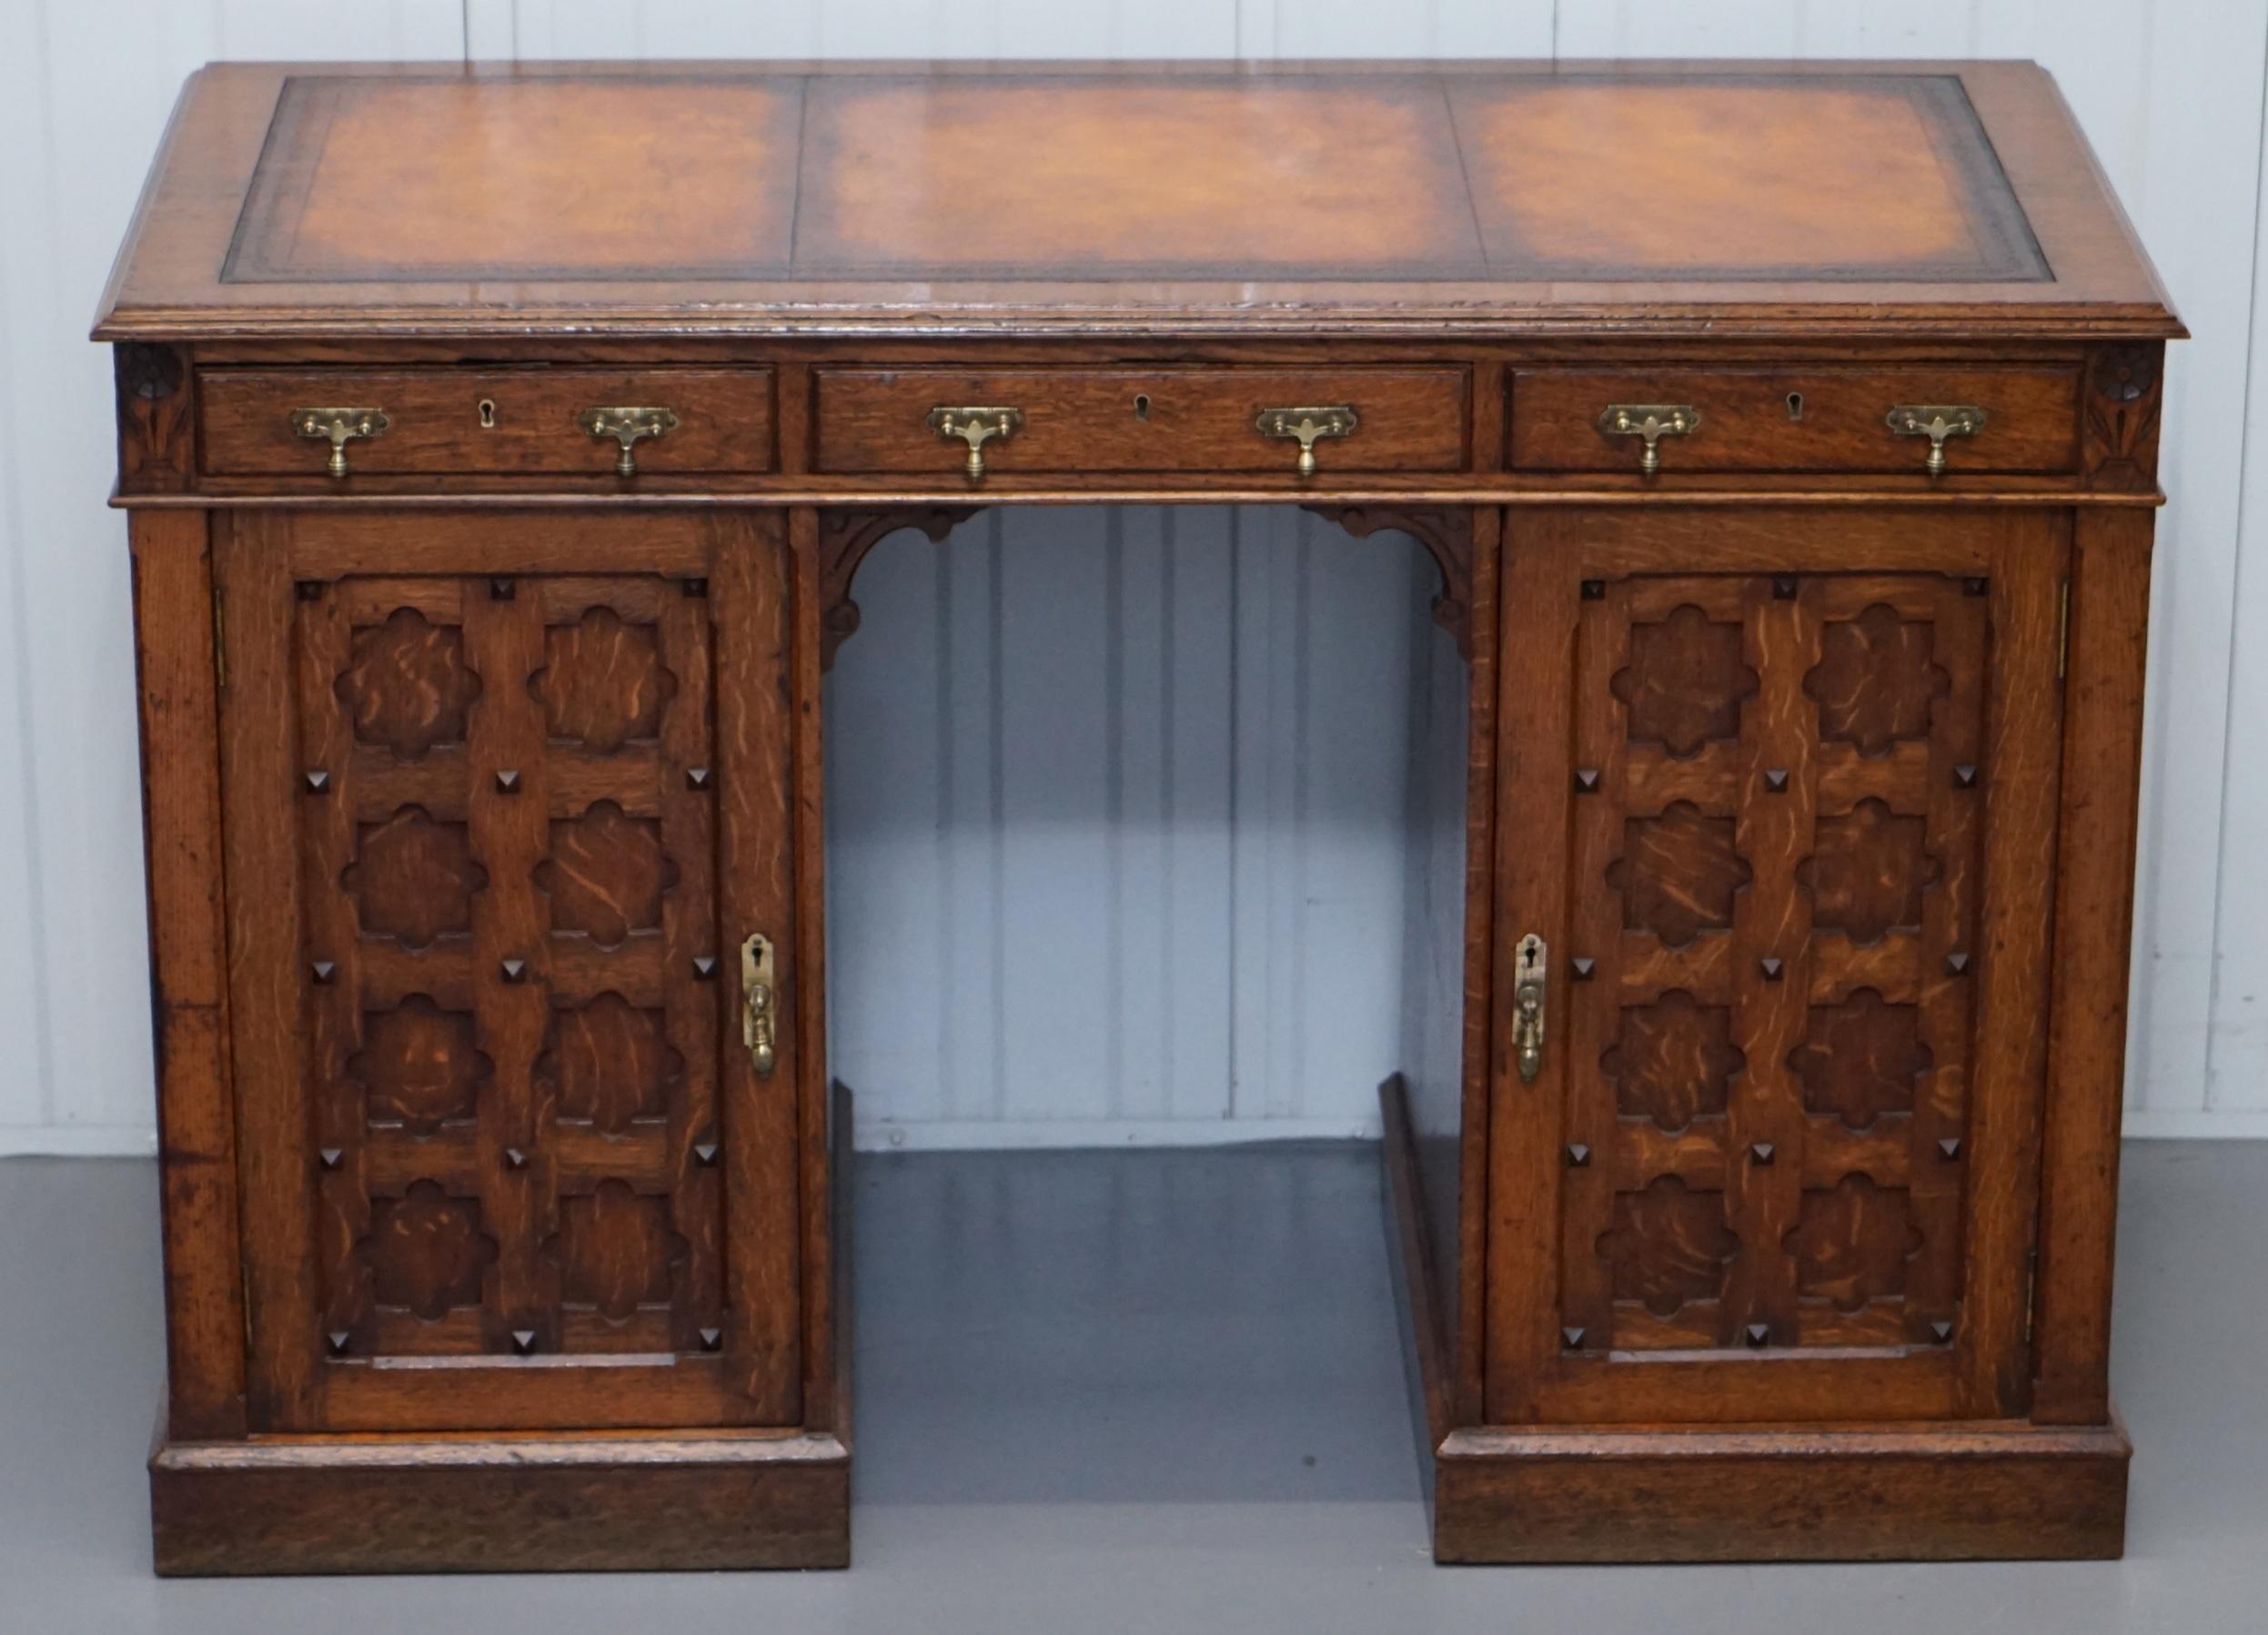 English Restored Gothic Revival Desk Side Bookcases Drawer Writing Slope Pugin Gillows For Sale